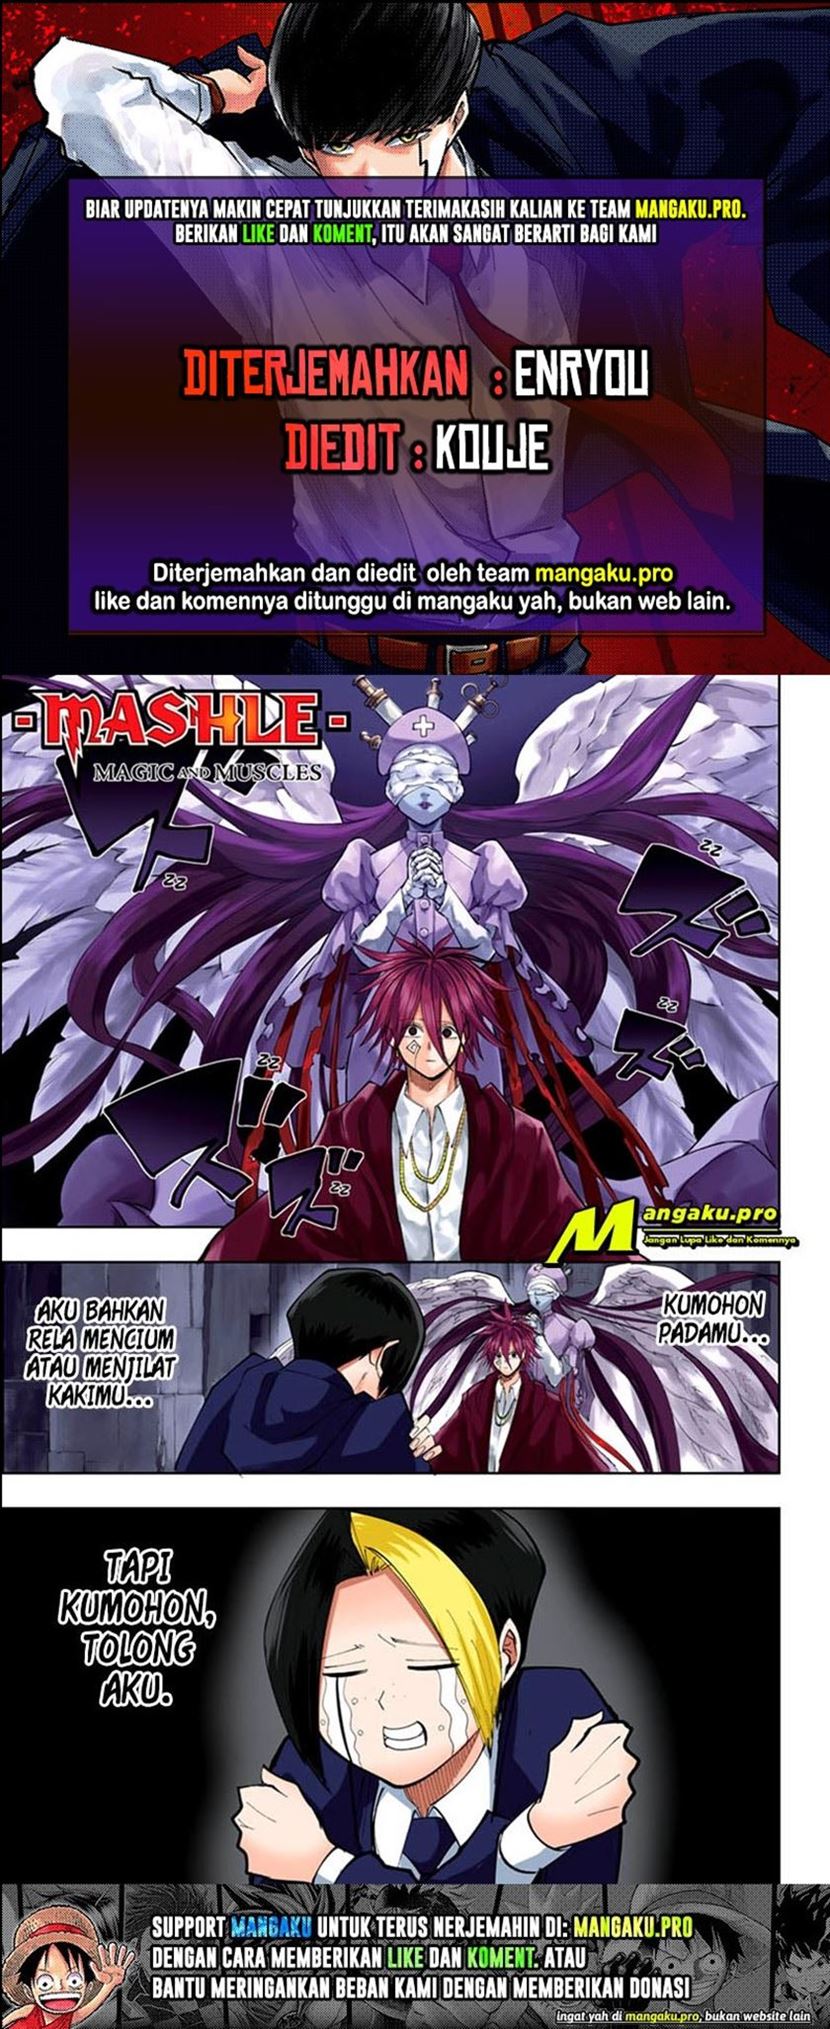 Mashle: Magic and Muscles Chapter 52